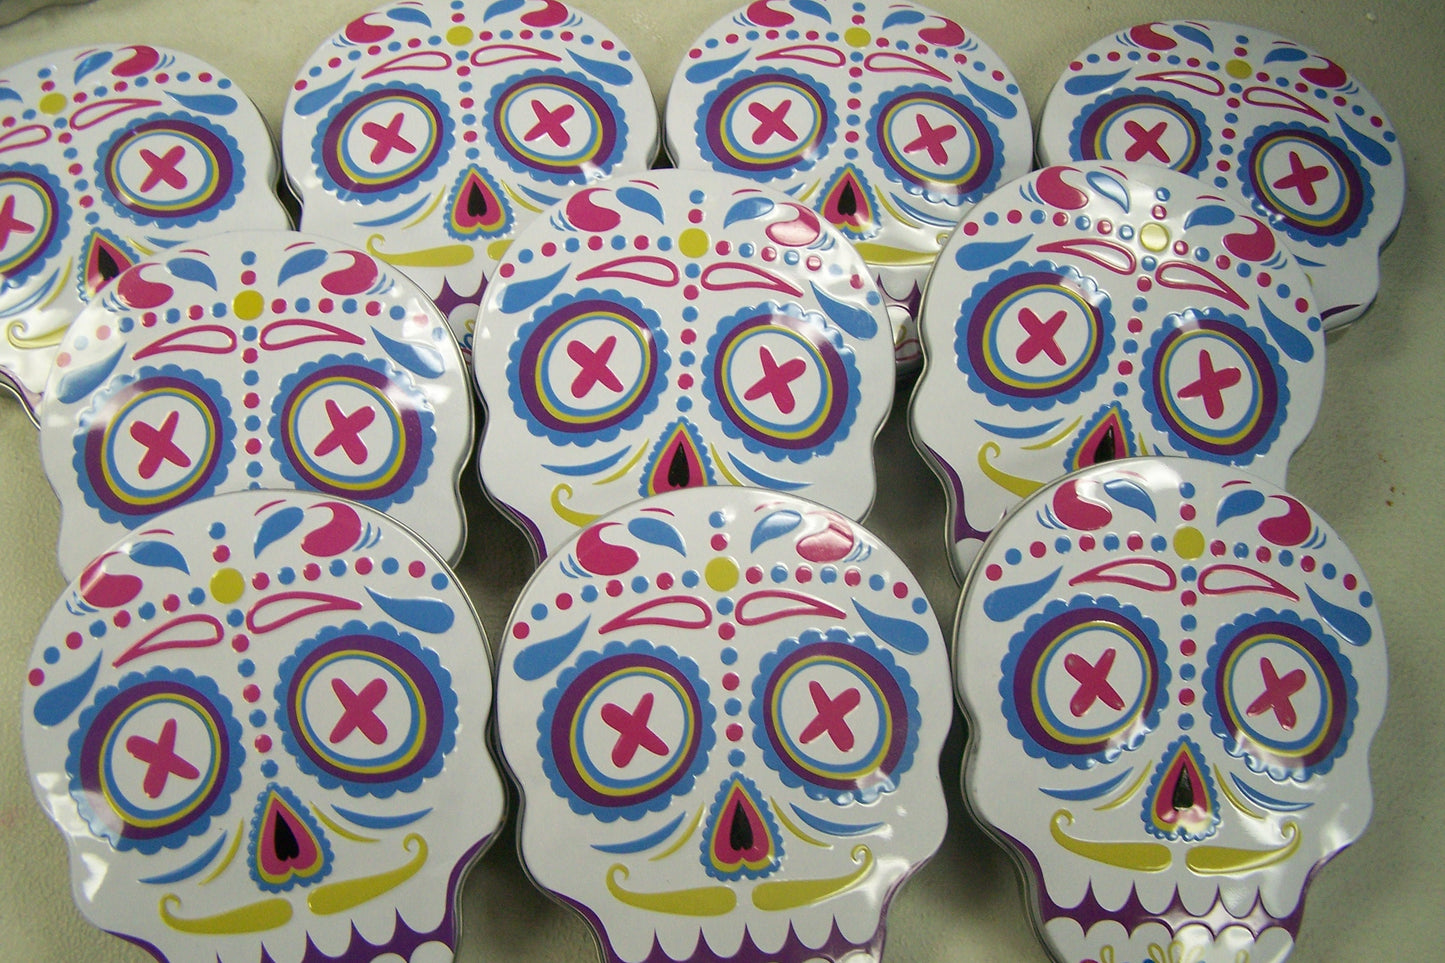 Wholesale Lot of 10 Day of the Dead Sugar Skull Metal Candy Tin, White - Dia de los Muertos